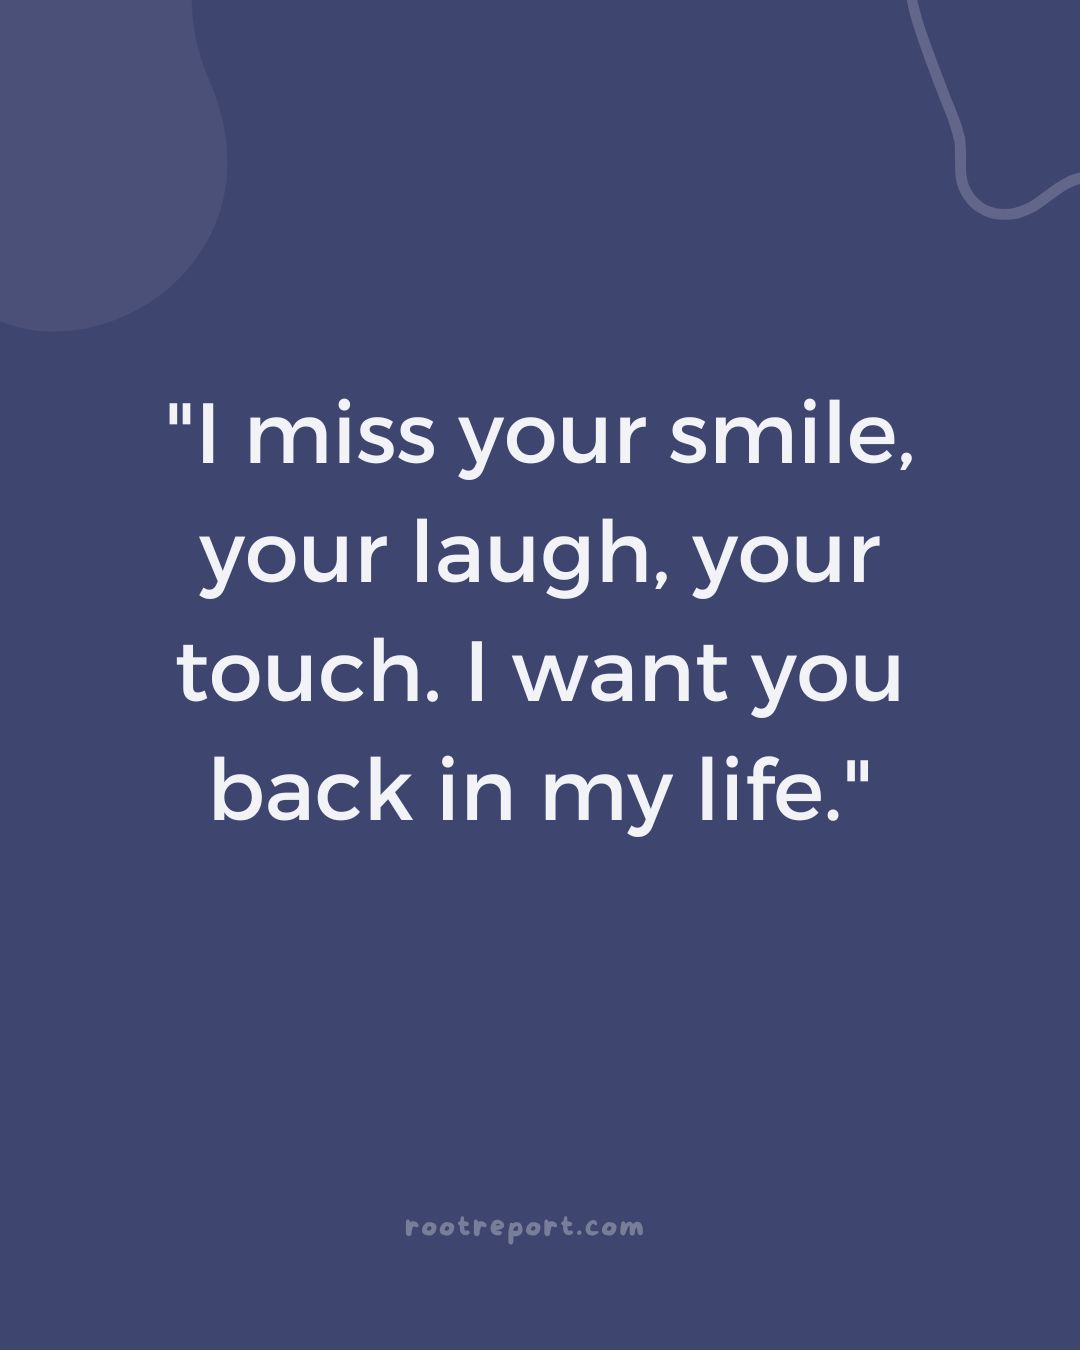 "I miss your smile, your laugh, your touch. I want you back in my life."